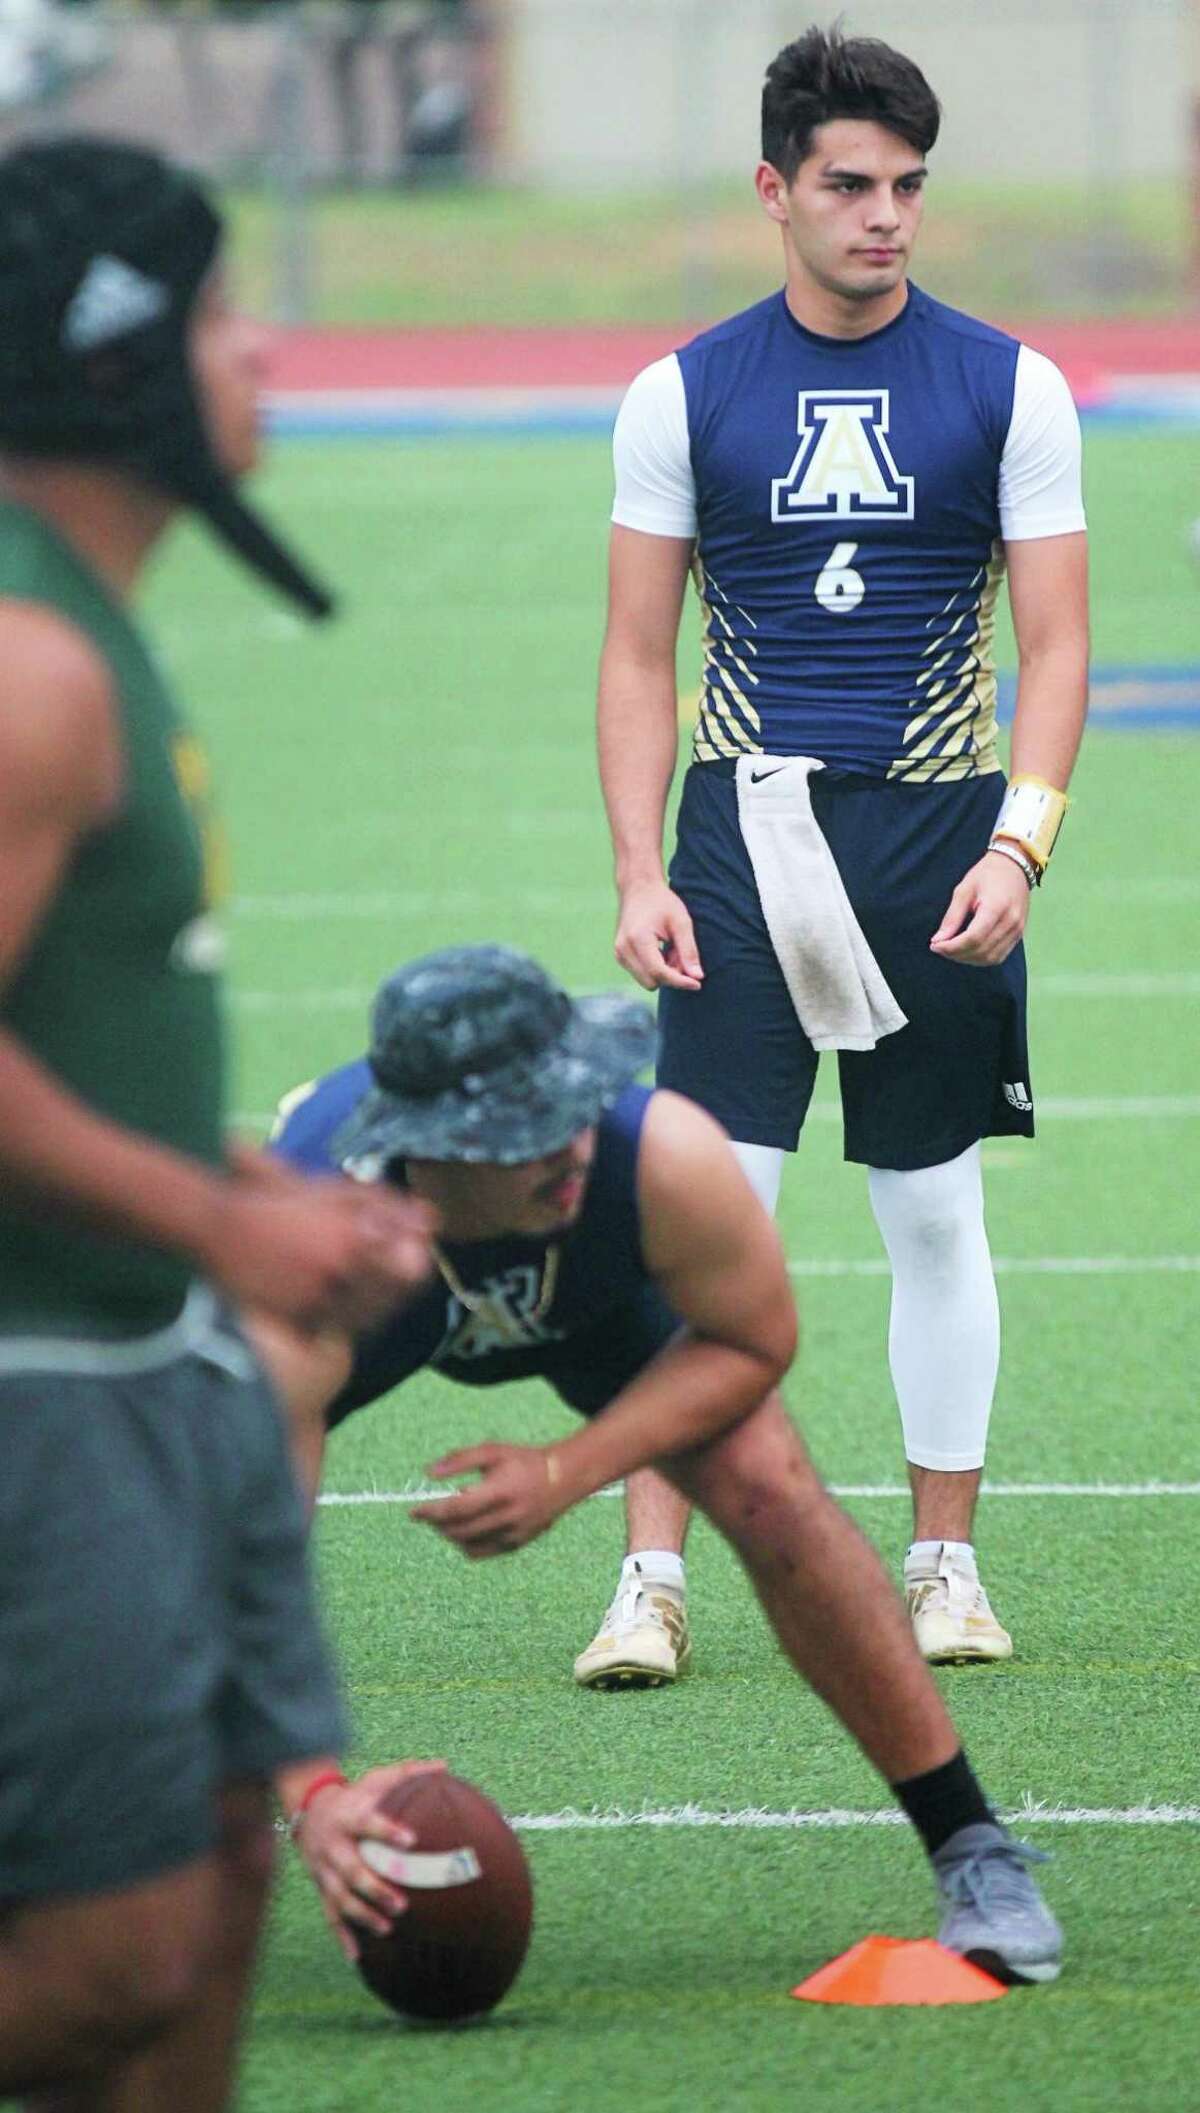 Alexander and quarterback Javi Jimenez will play Weslaco East, Mission Sharyland and Harlingen in three 7-on-7 games starting at 10 a.m. on Saturday in Mission.